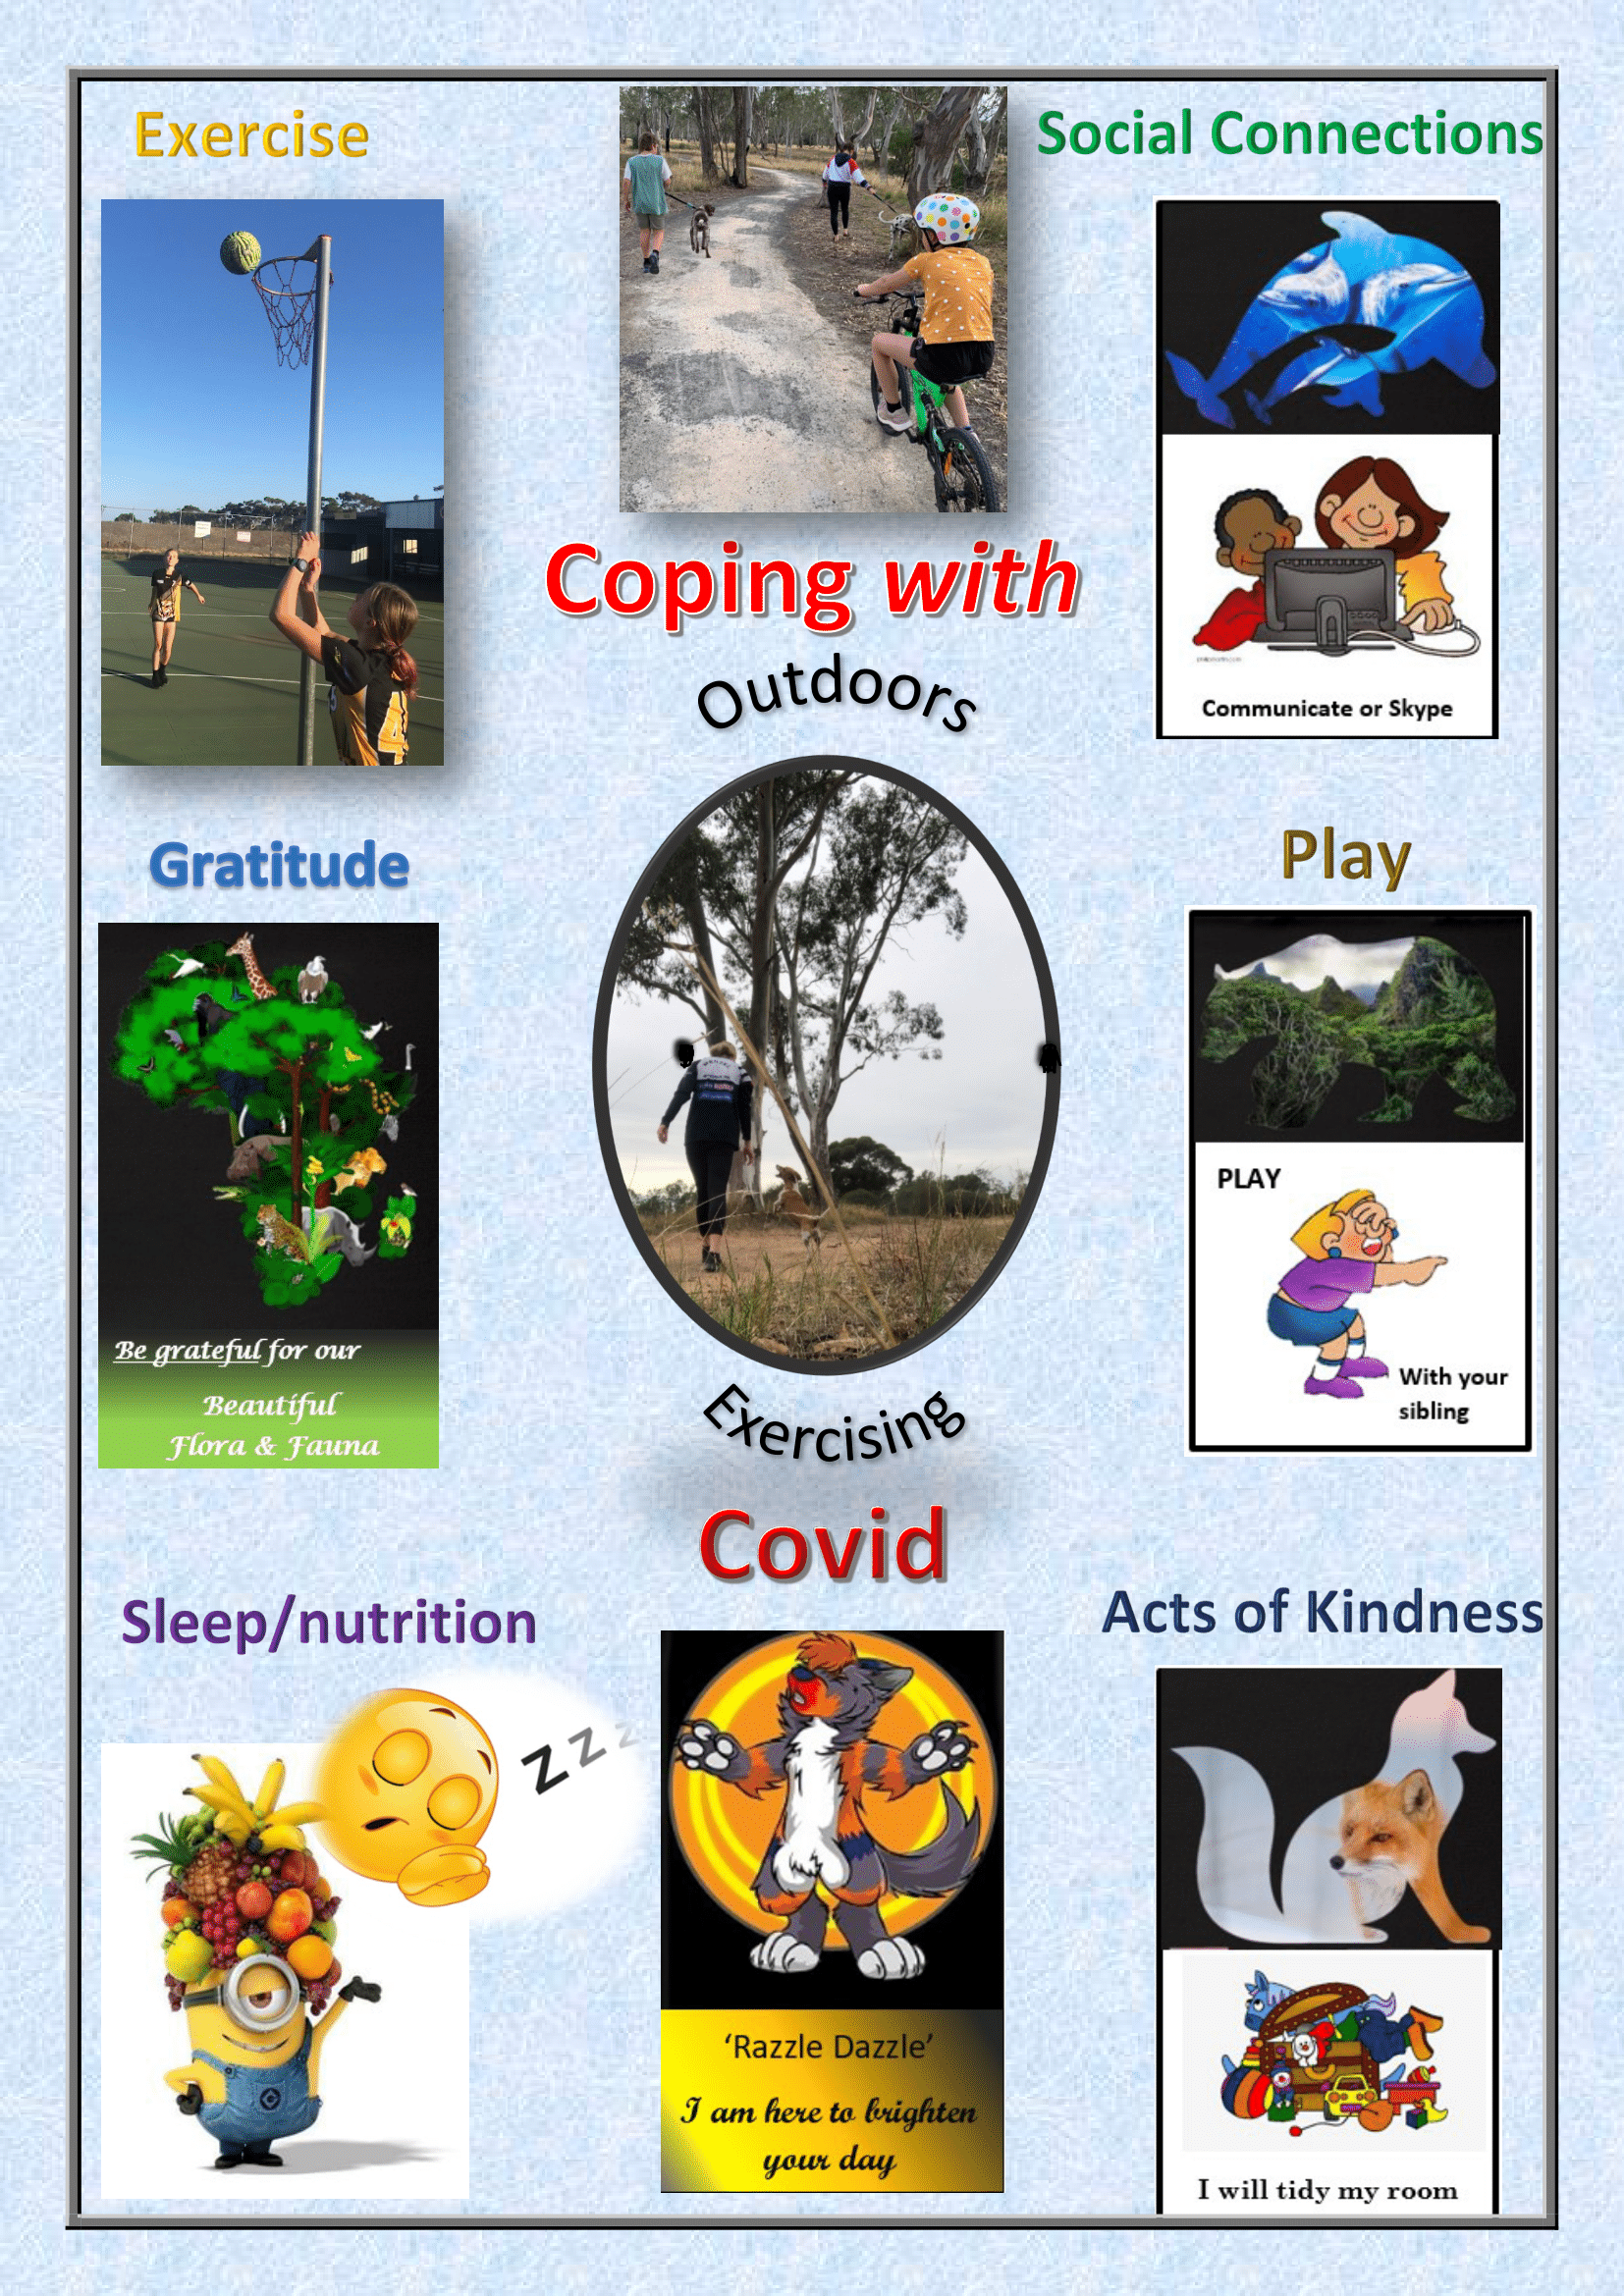 Coping with Covid